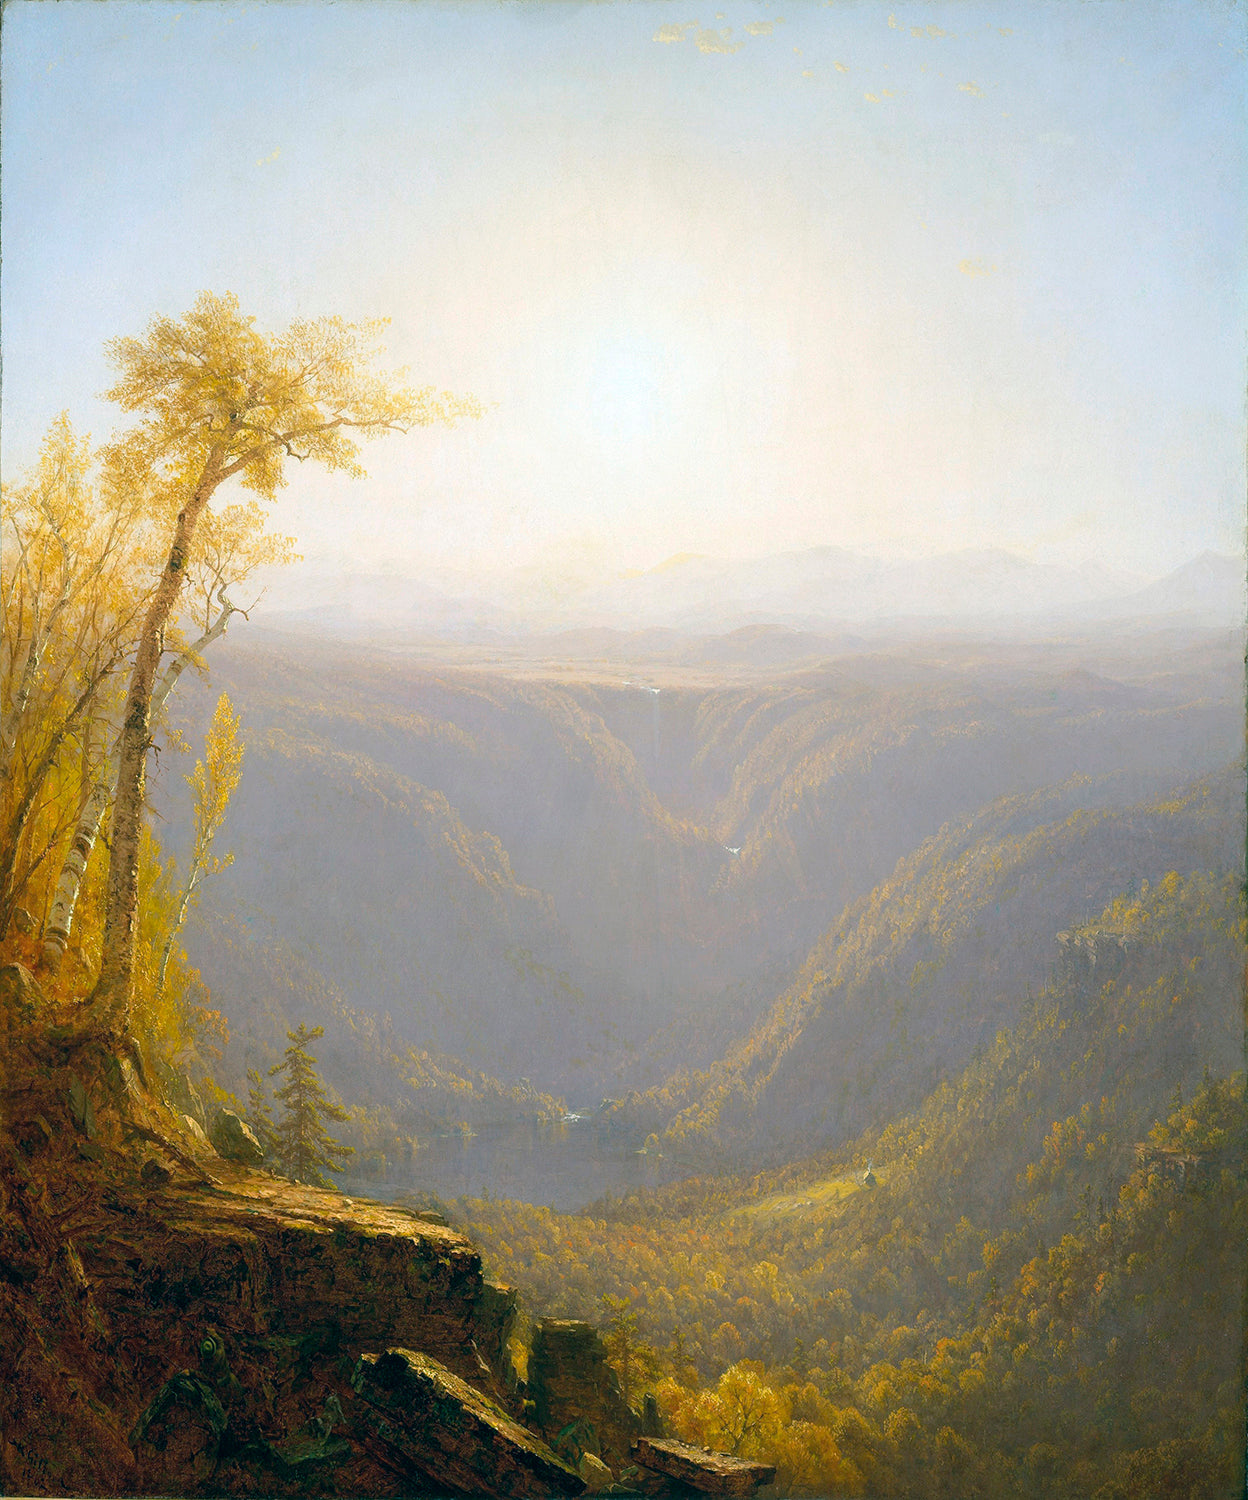 A Gorge In The Mountains - Kauterskill Falls  by Sanford Robinson Gifford Art Print